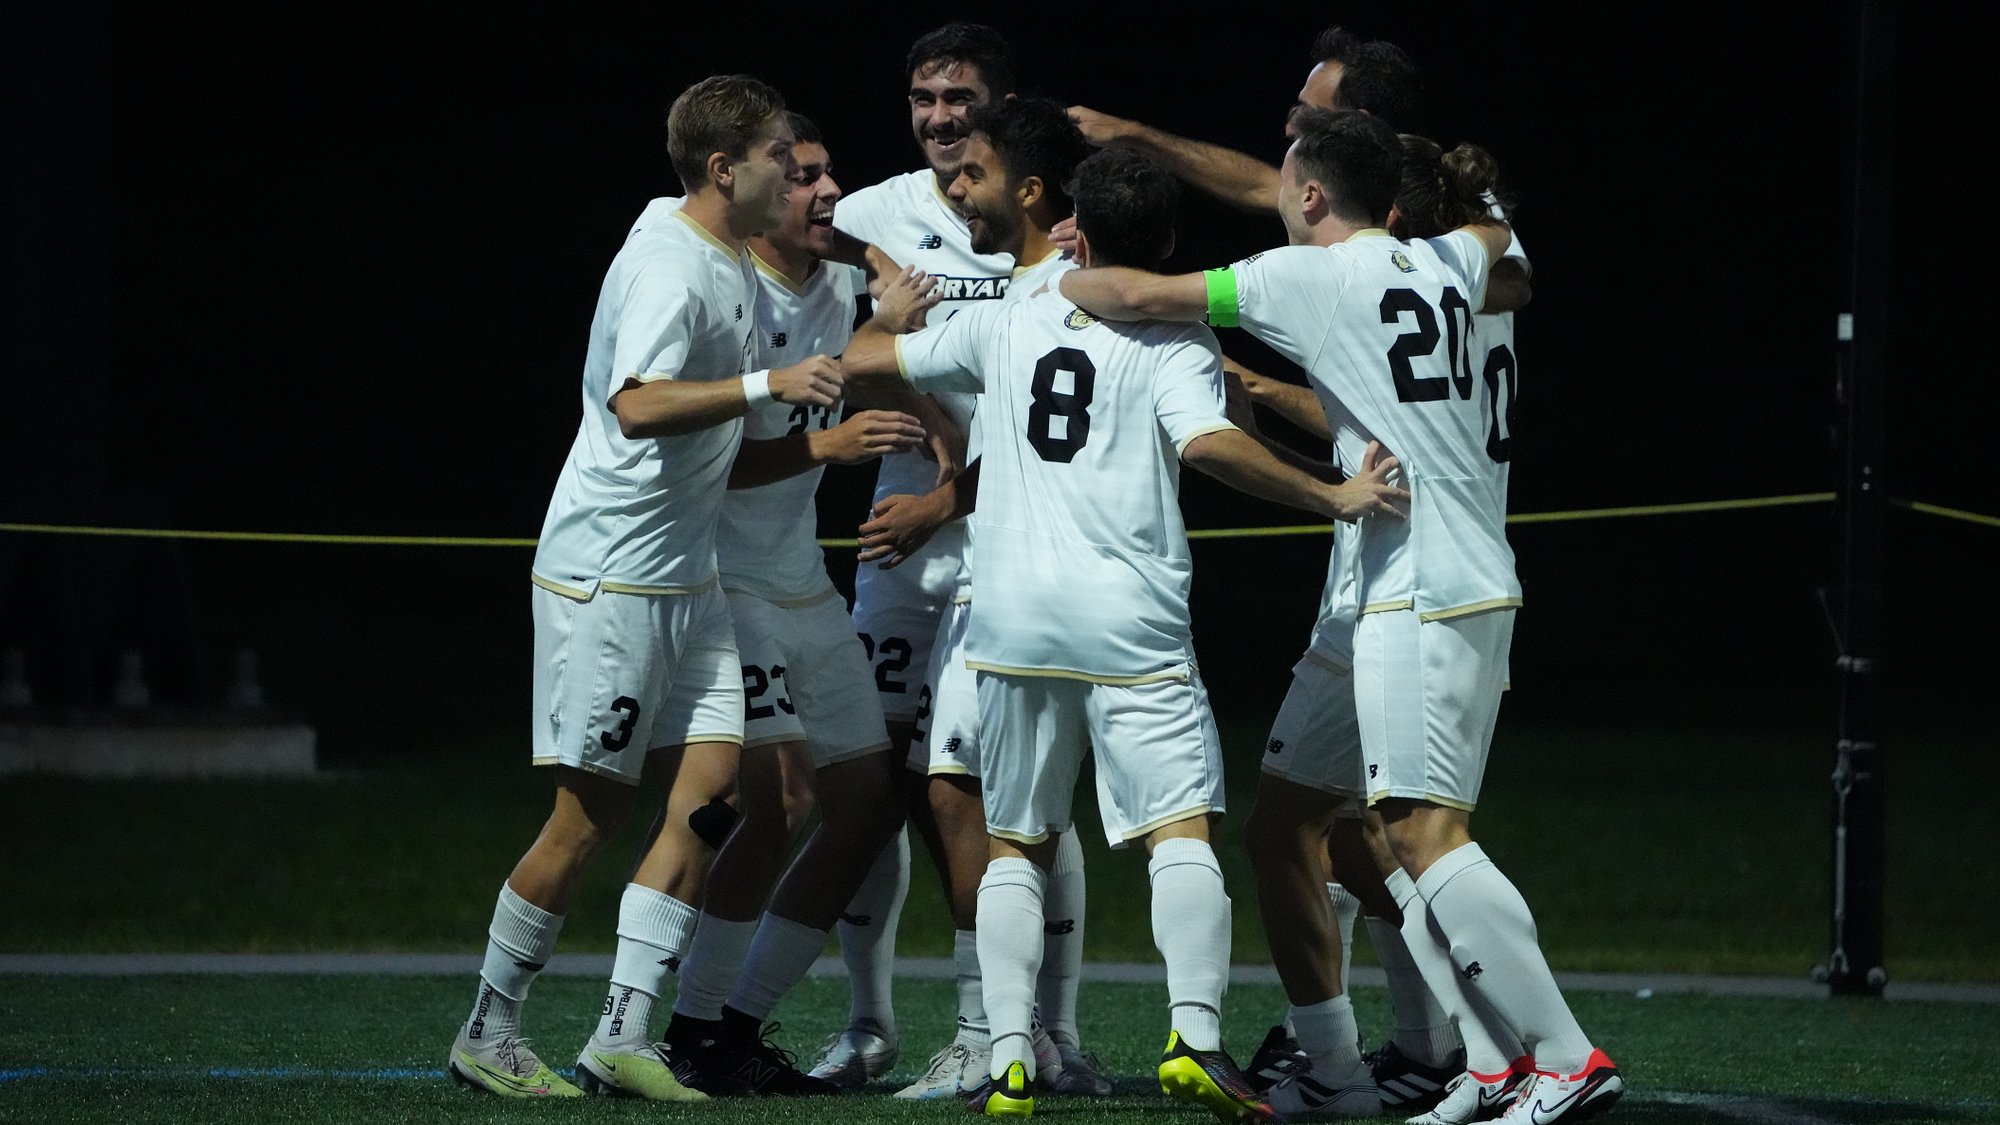 Dawgs earn No.2 seed in America East playoffs with win